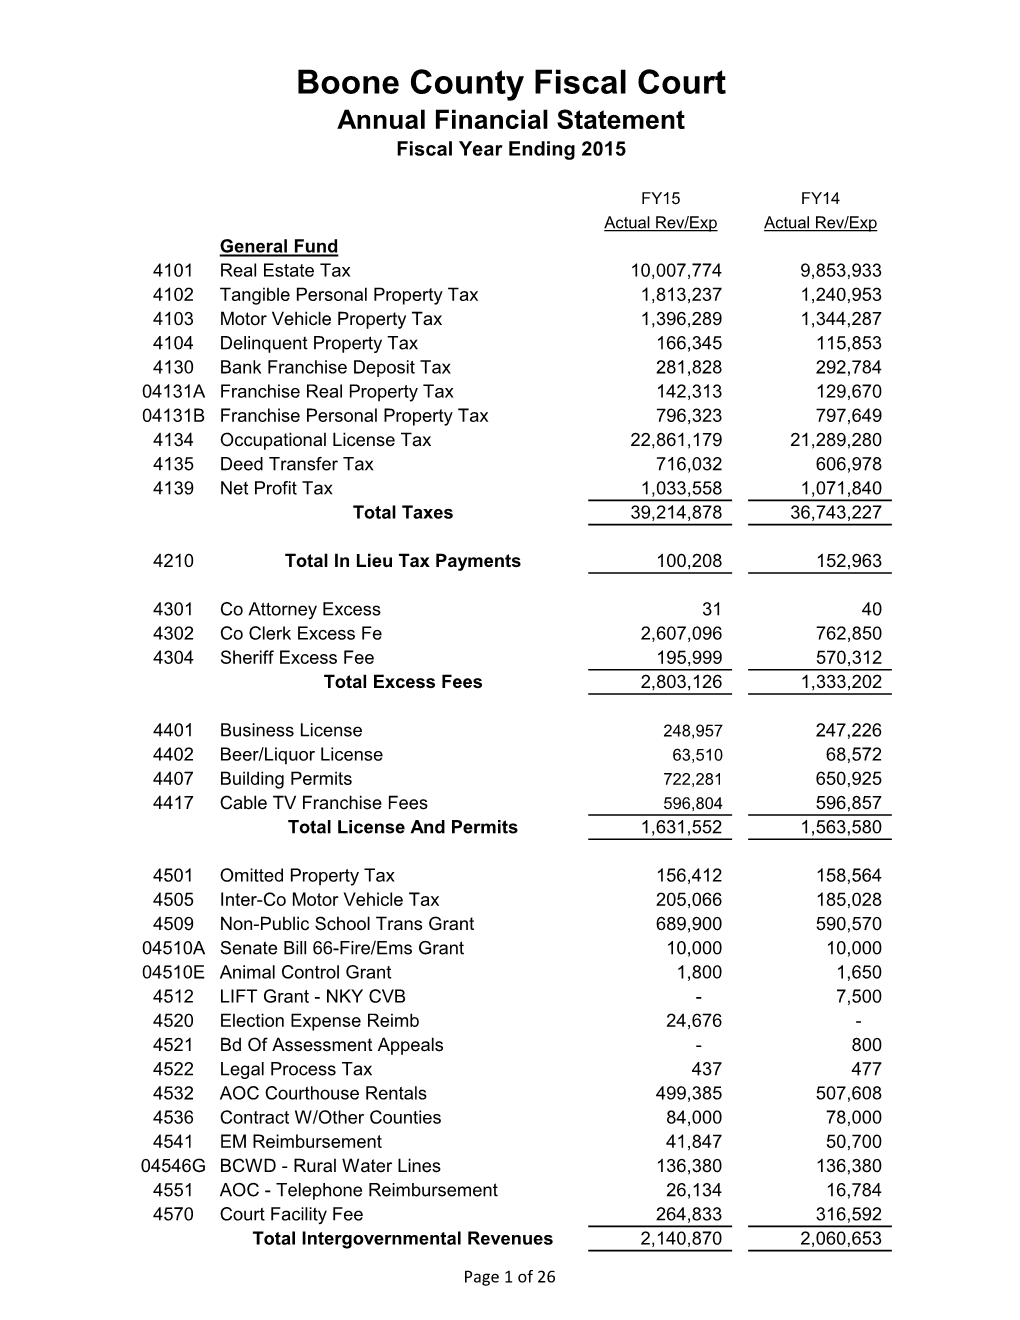 Boone County Fiscal Court Annual Financial Statement Fiscal Year Ending 2015